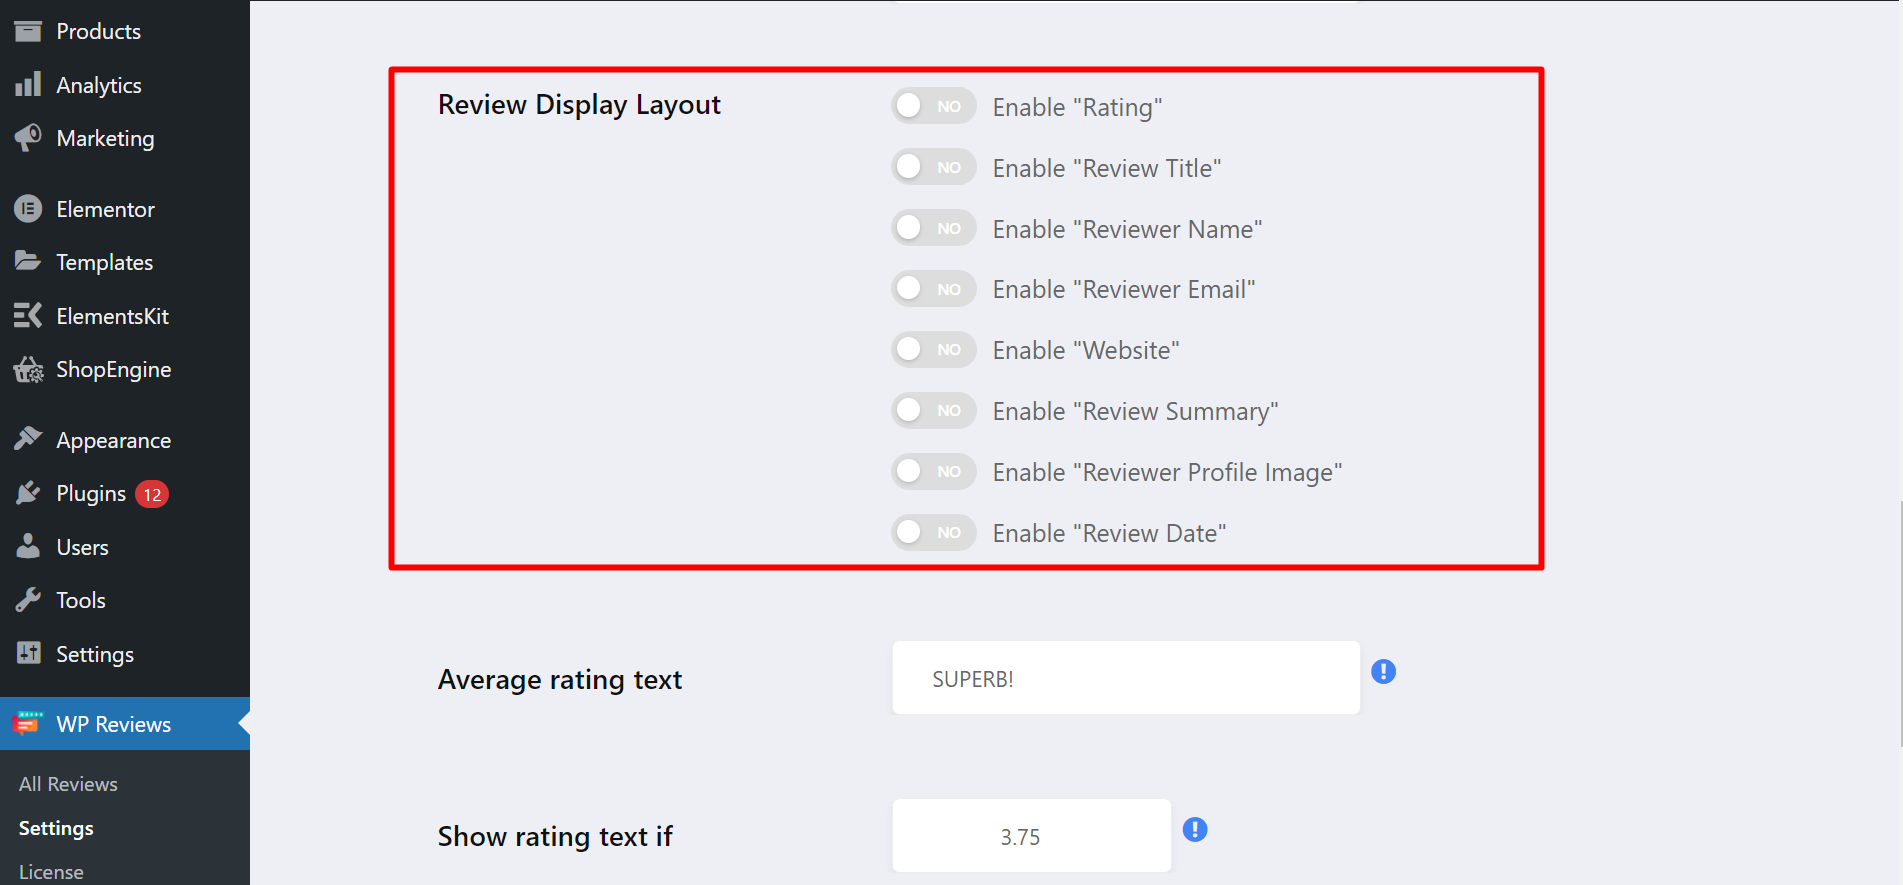 Review display layout settings